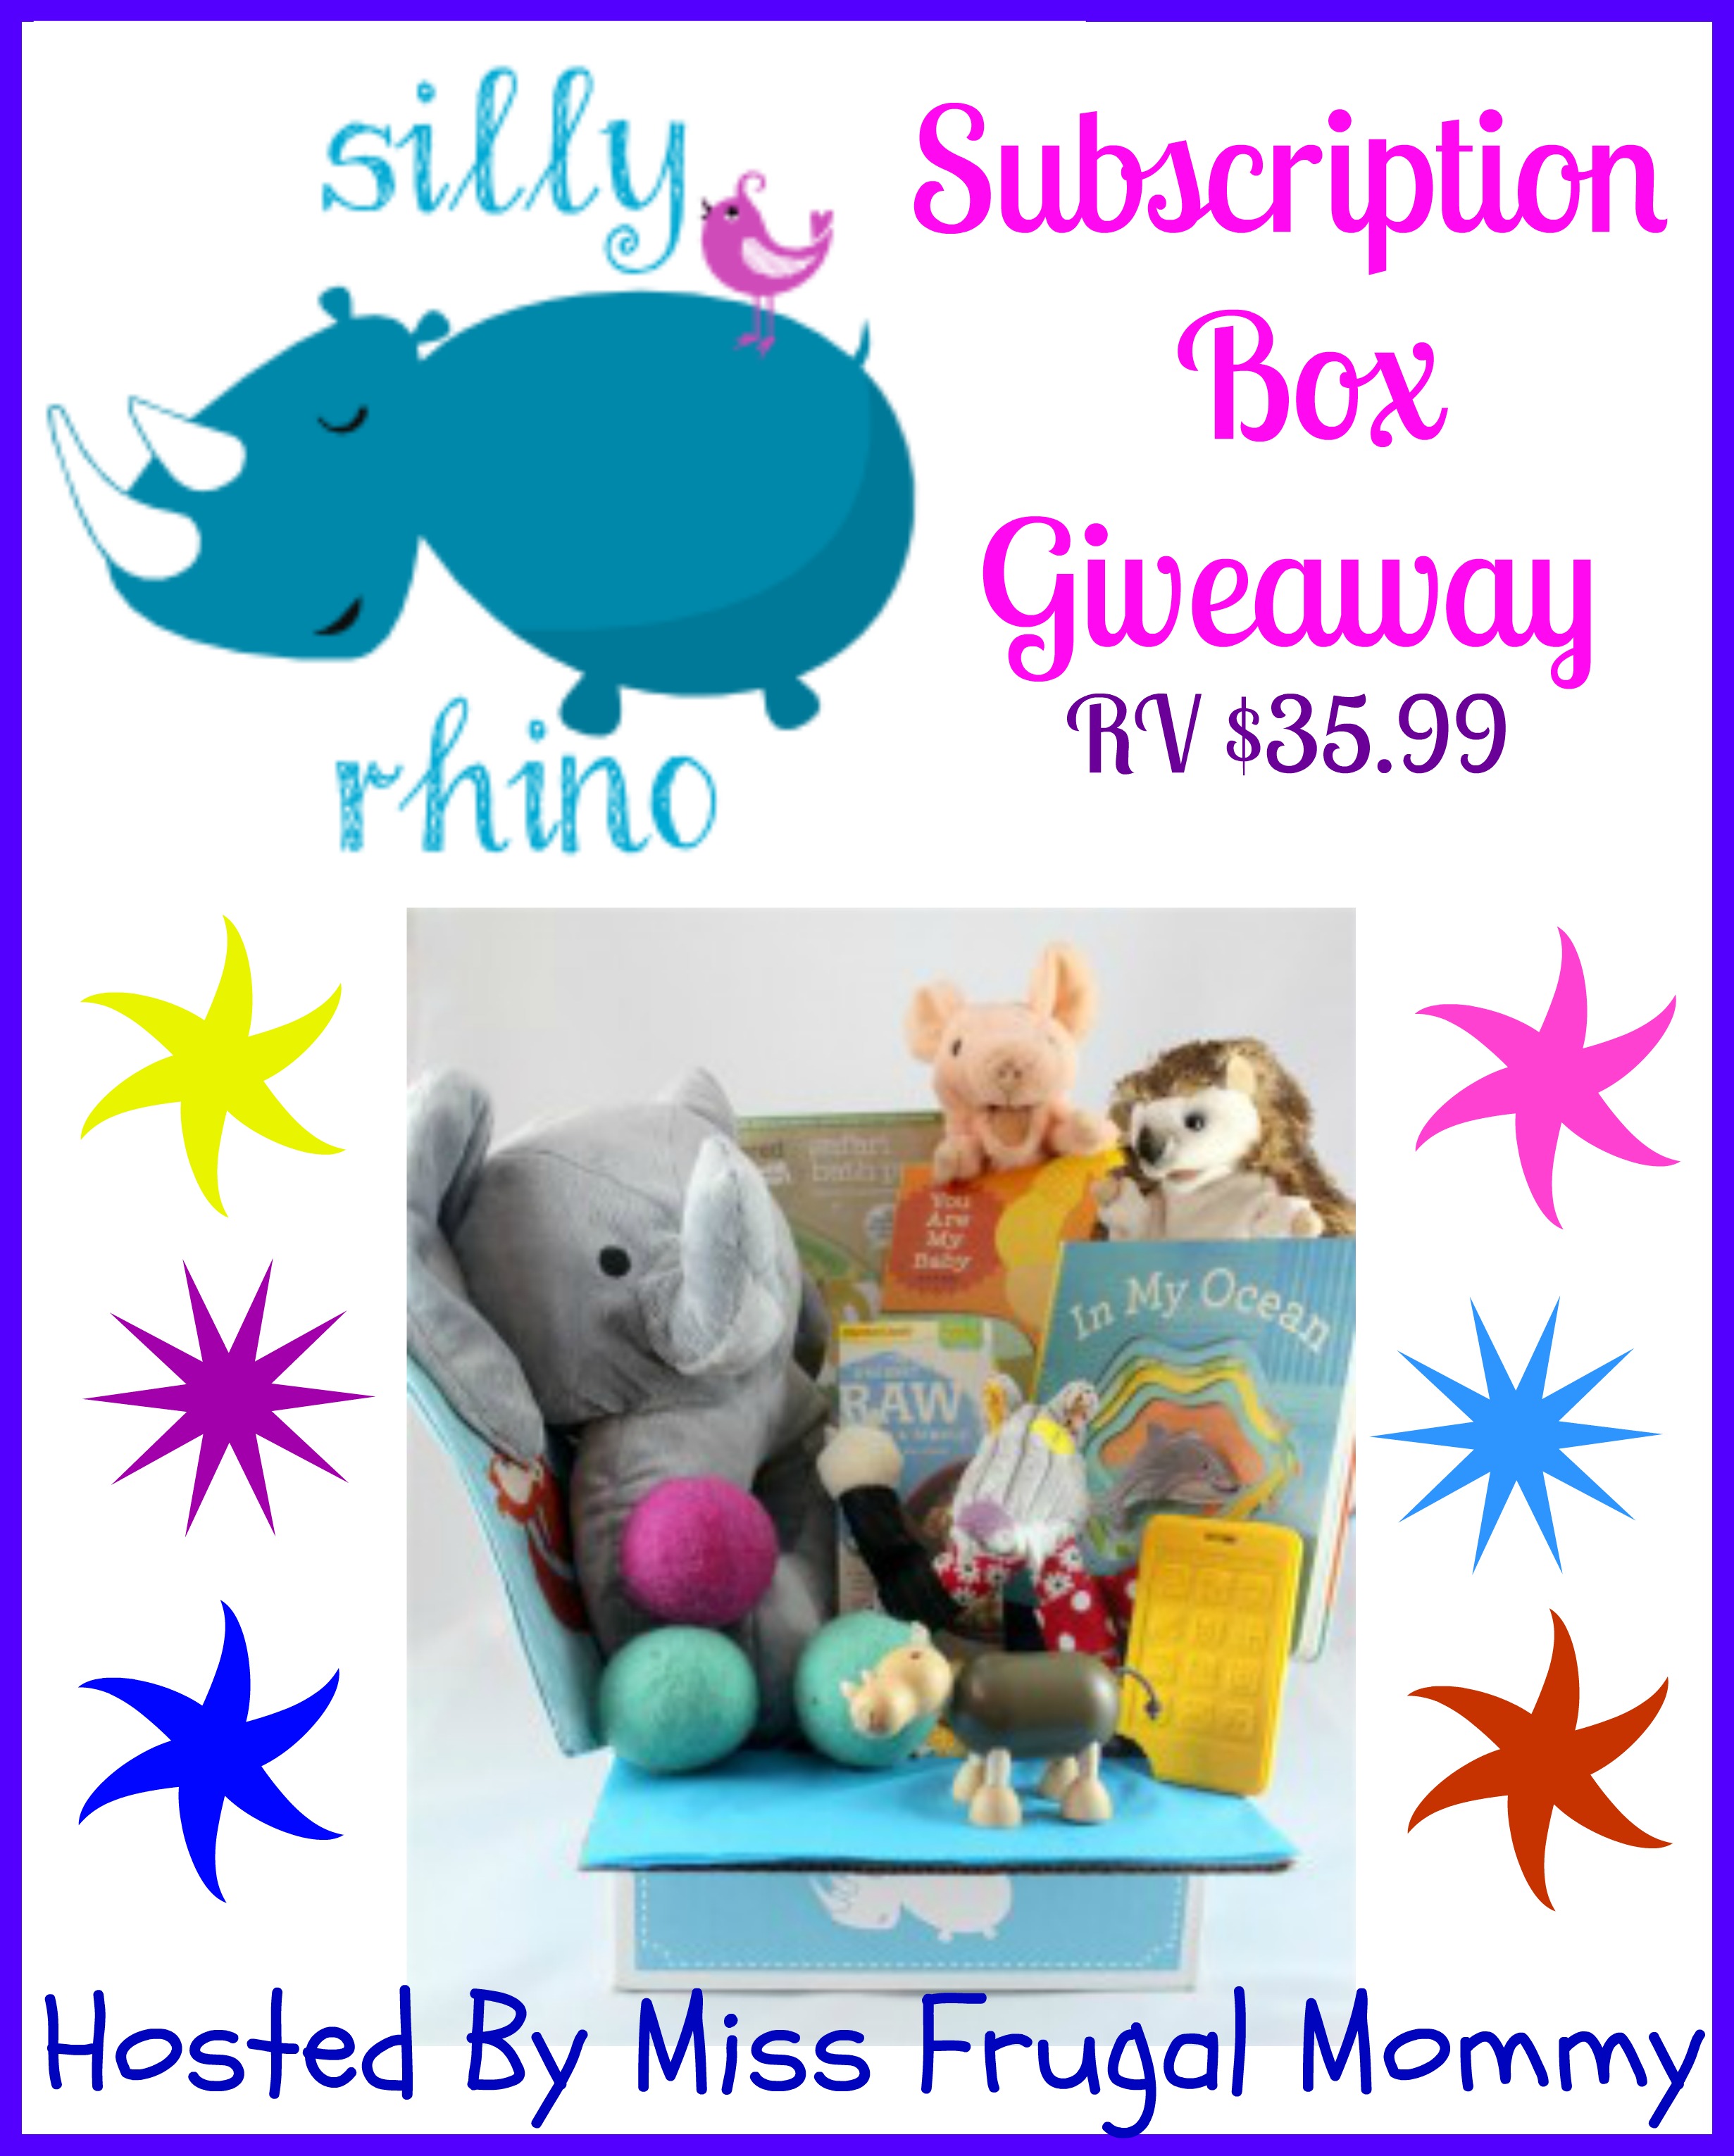 Silly Rhino Subscription Box Giveaway